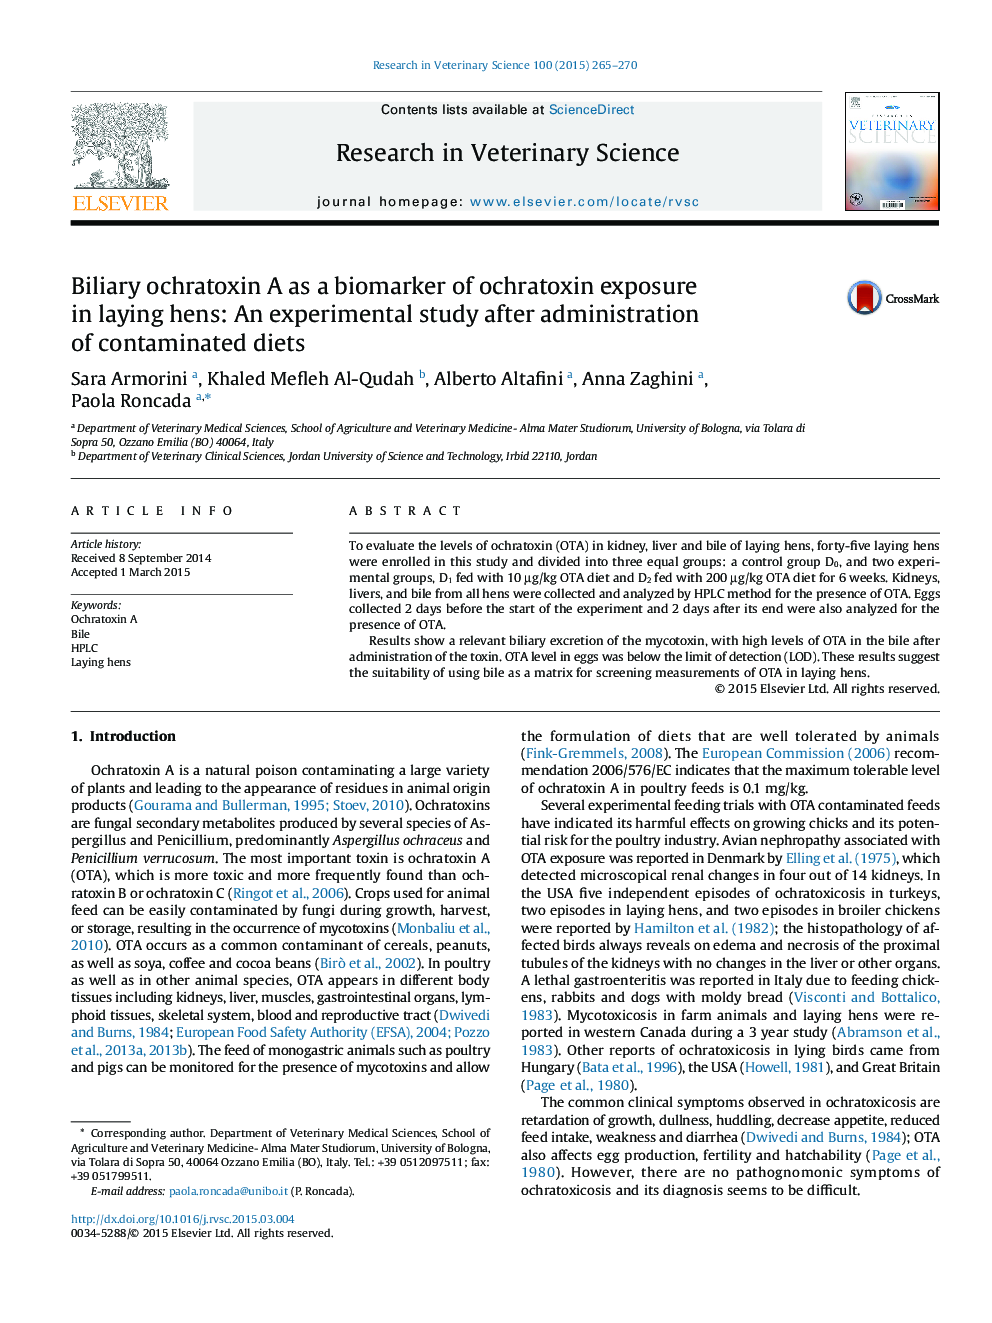 Biliary ochratoxin A as a biomarker of ochratoxin exposure in laying hens: An experimental study after administration of contaminated diets